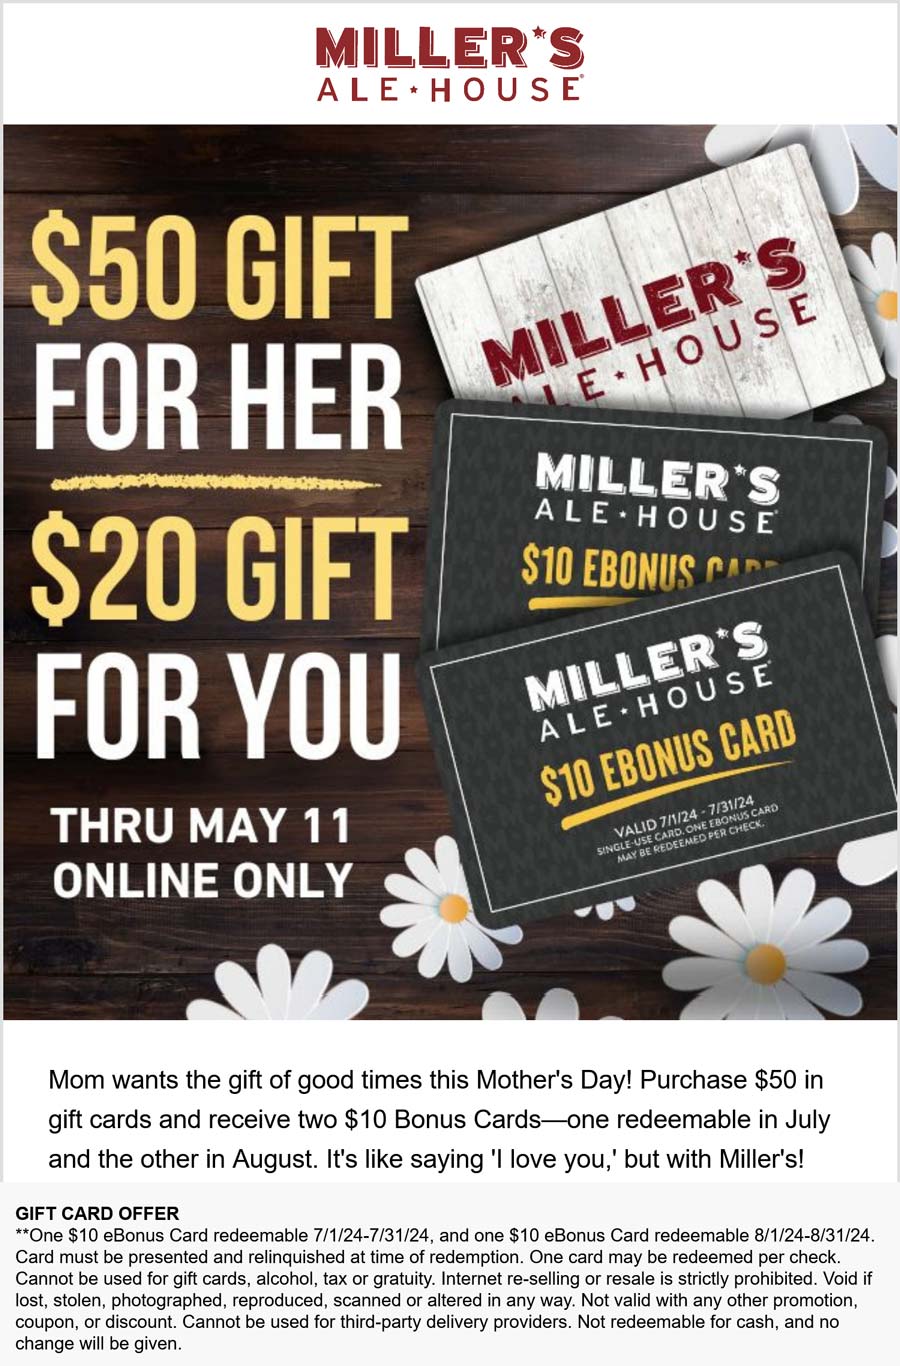 Millers Ale House restaurants Coupon  $20 card with your $50 gift card at Millers Ale House restaurants #millersalehouse 